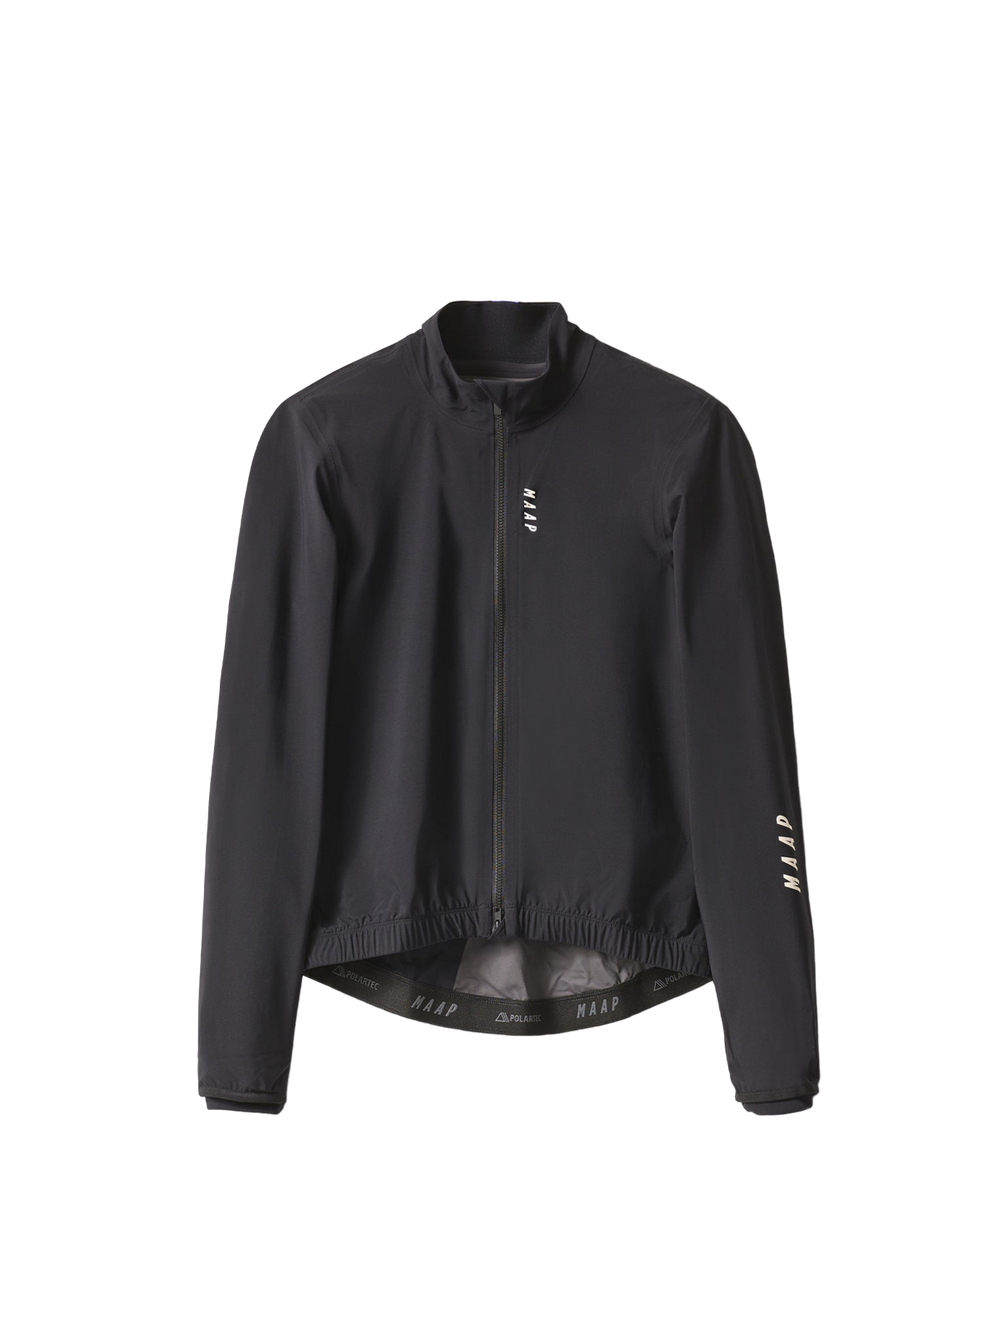 Product Image for Women's Prime Jacket